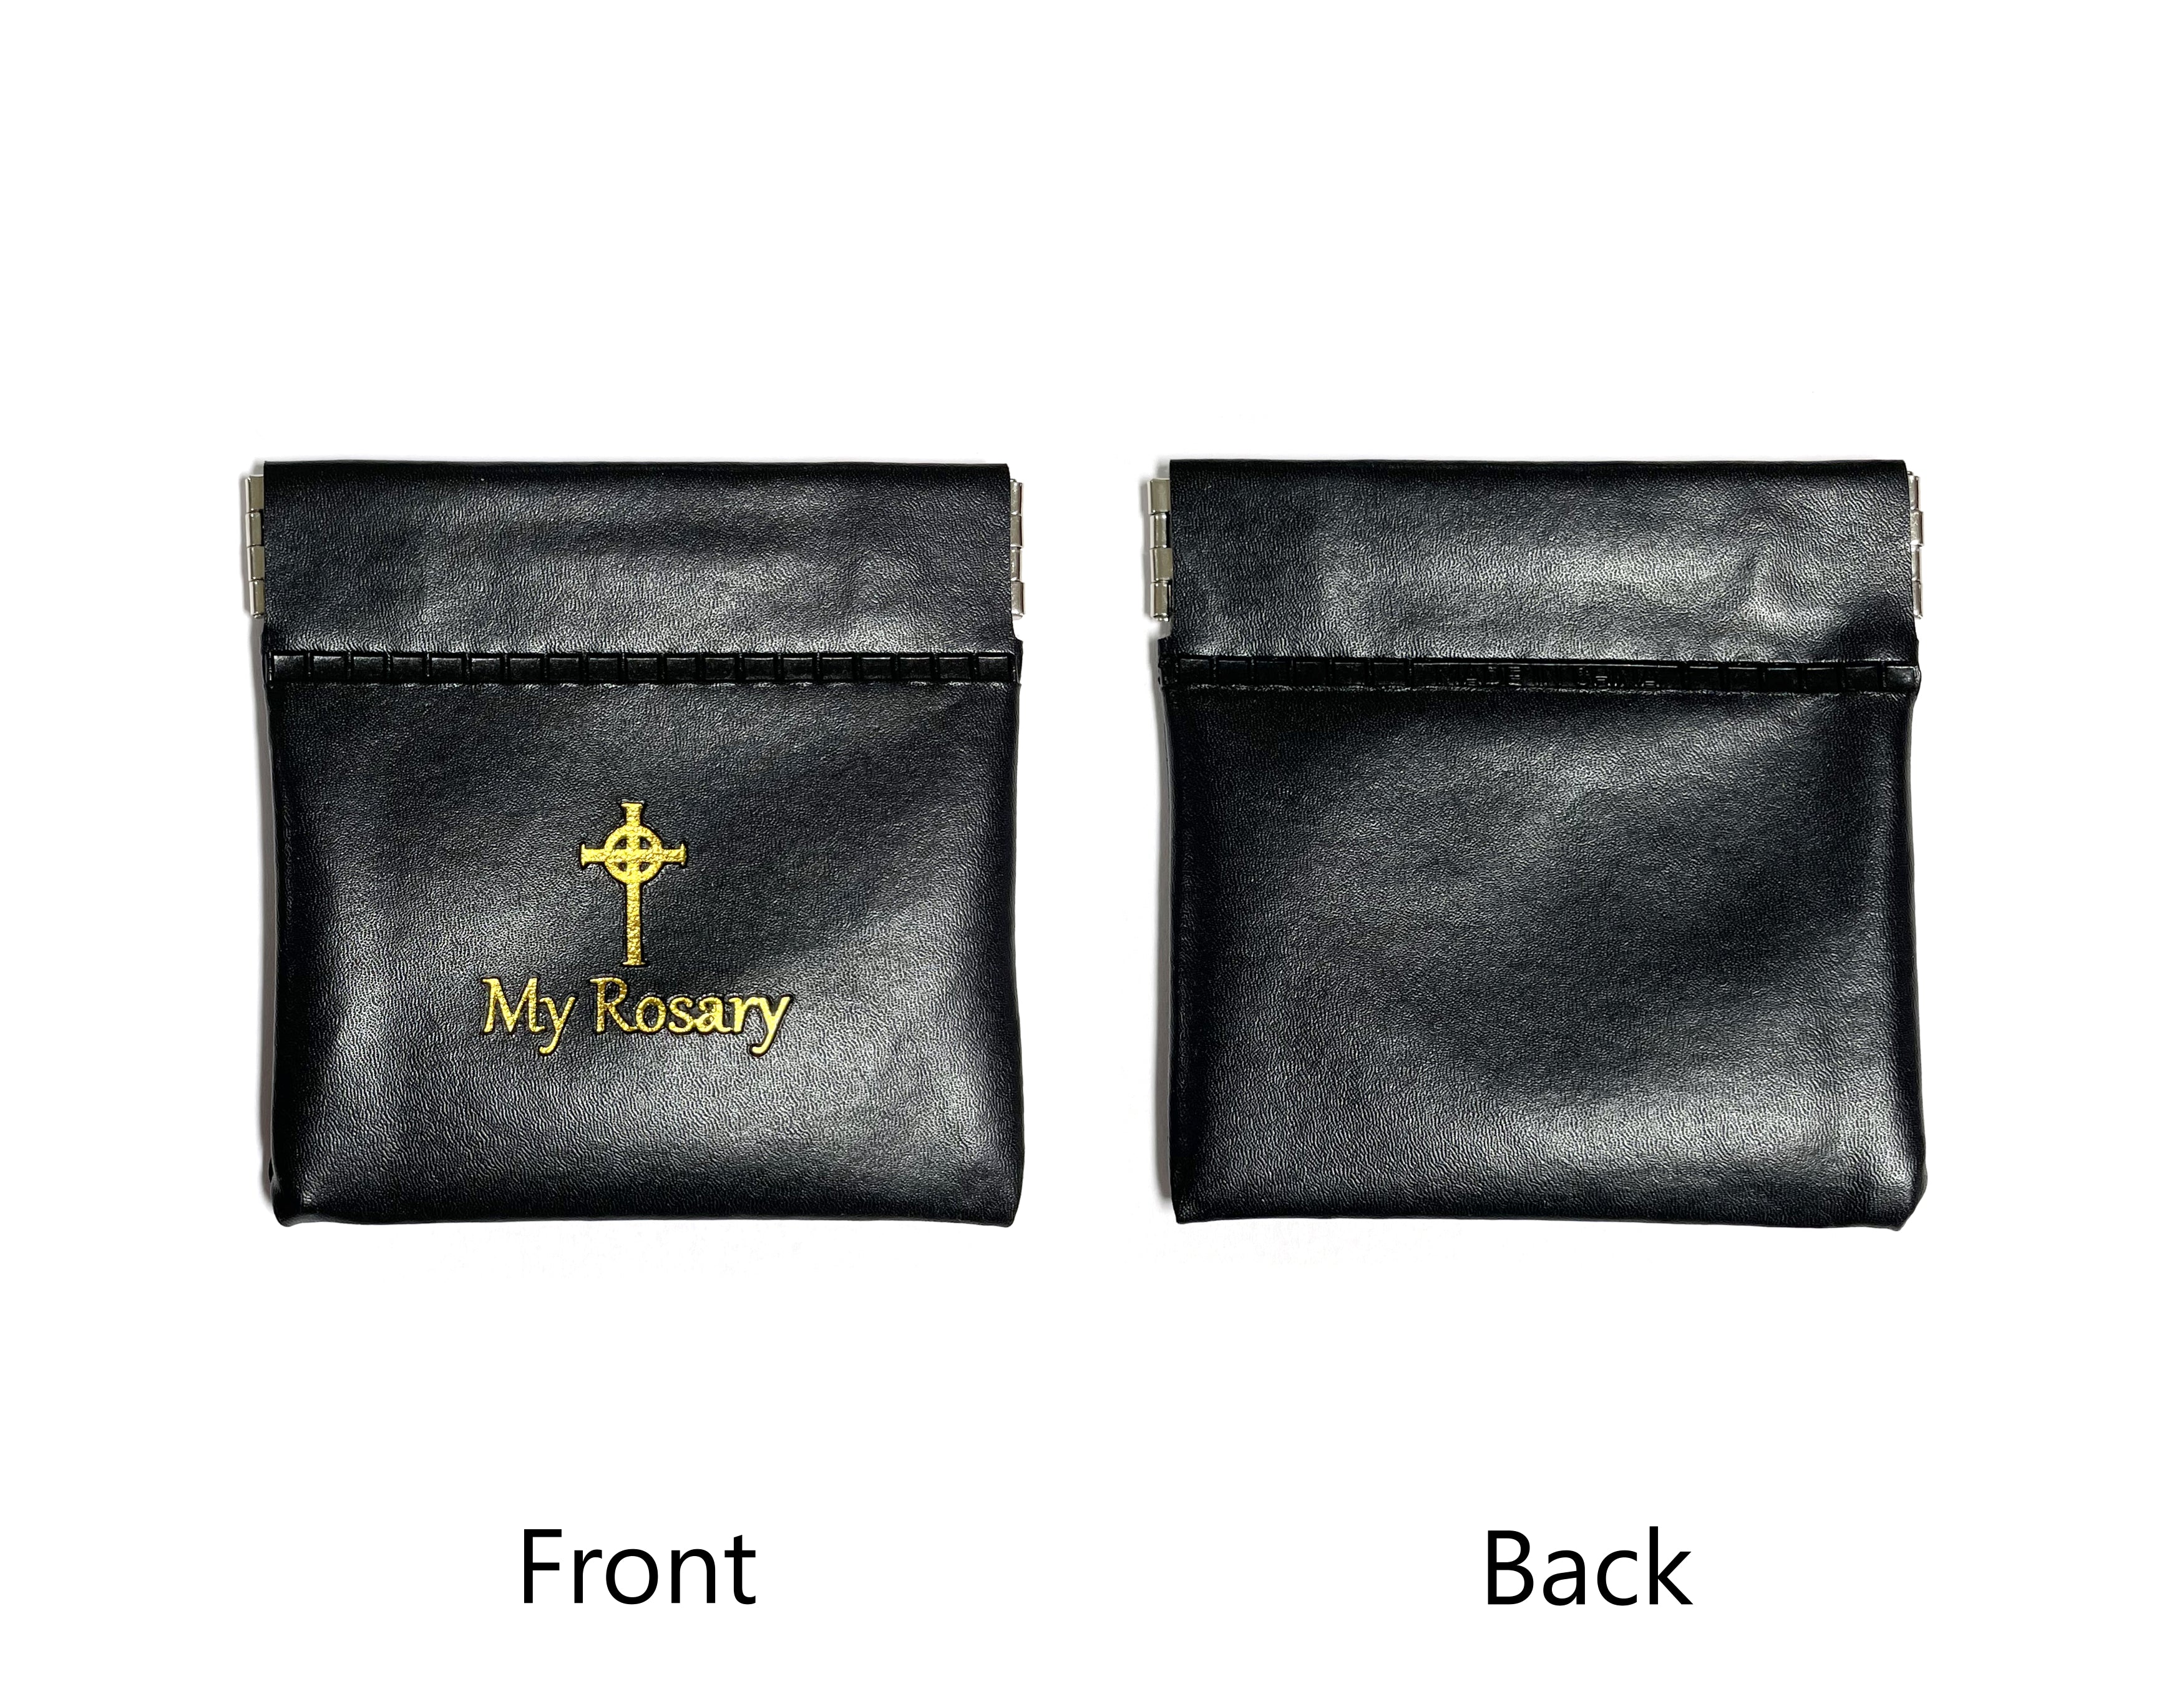 Rosary case pouch squeeze top and gold cross design